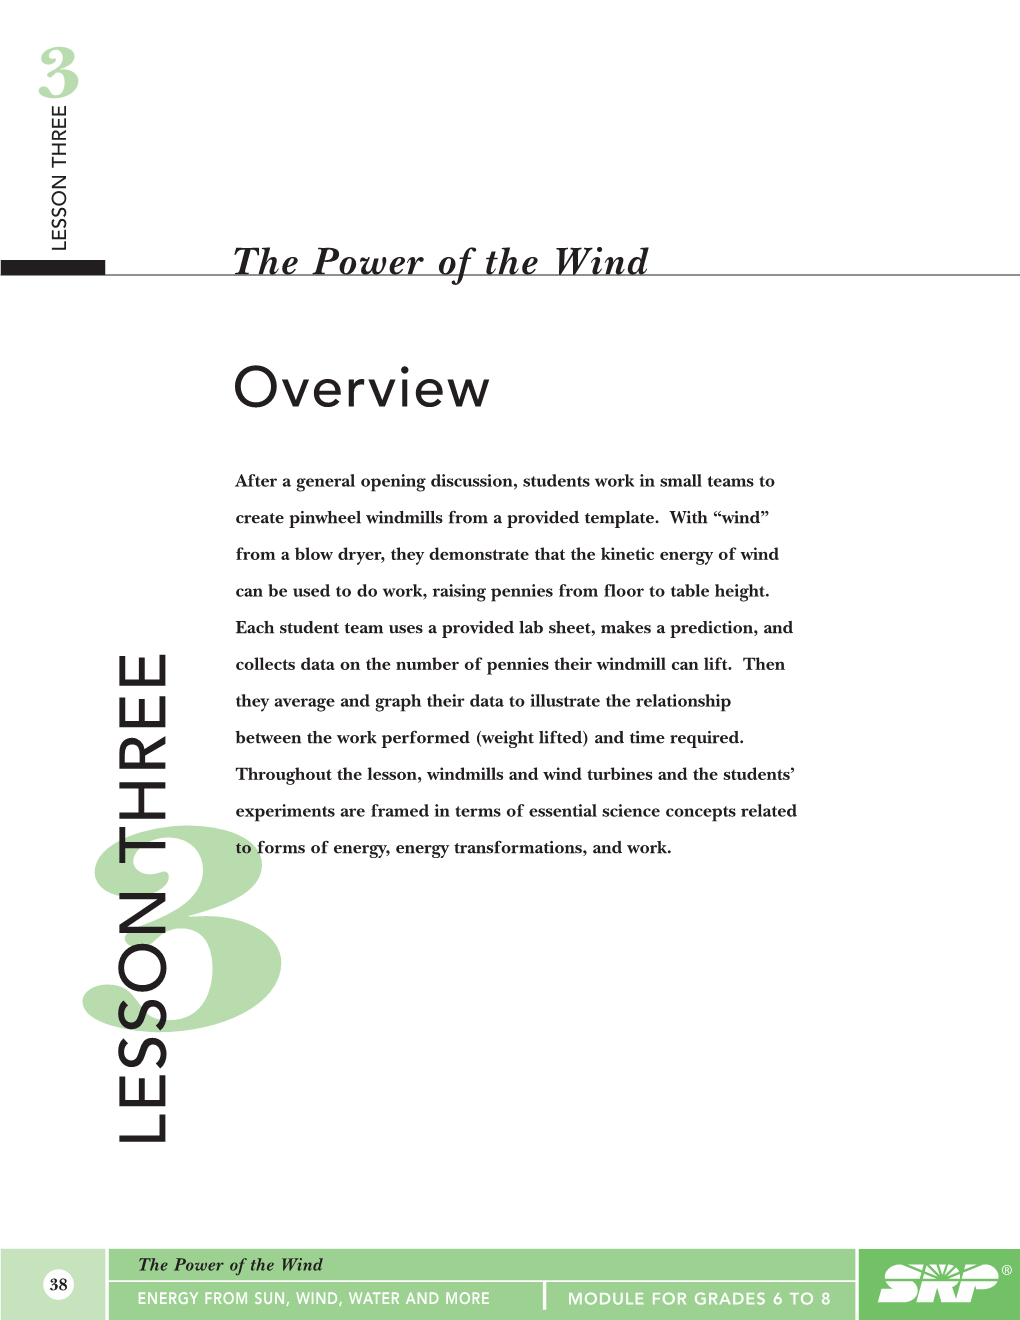 The Power of the Wind (PDF)